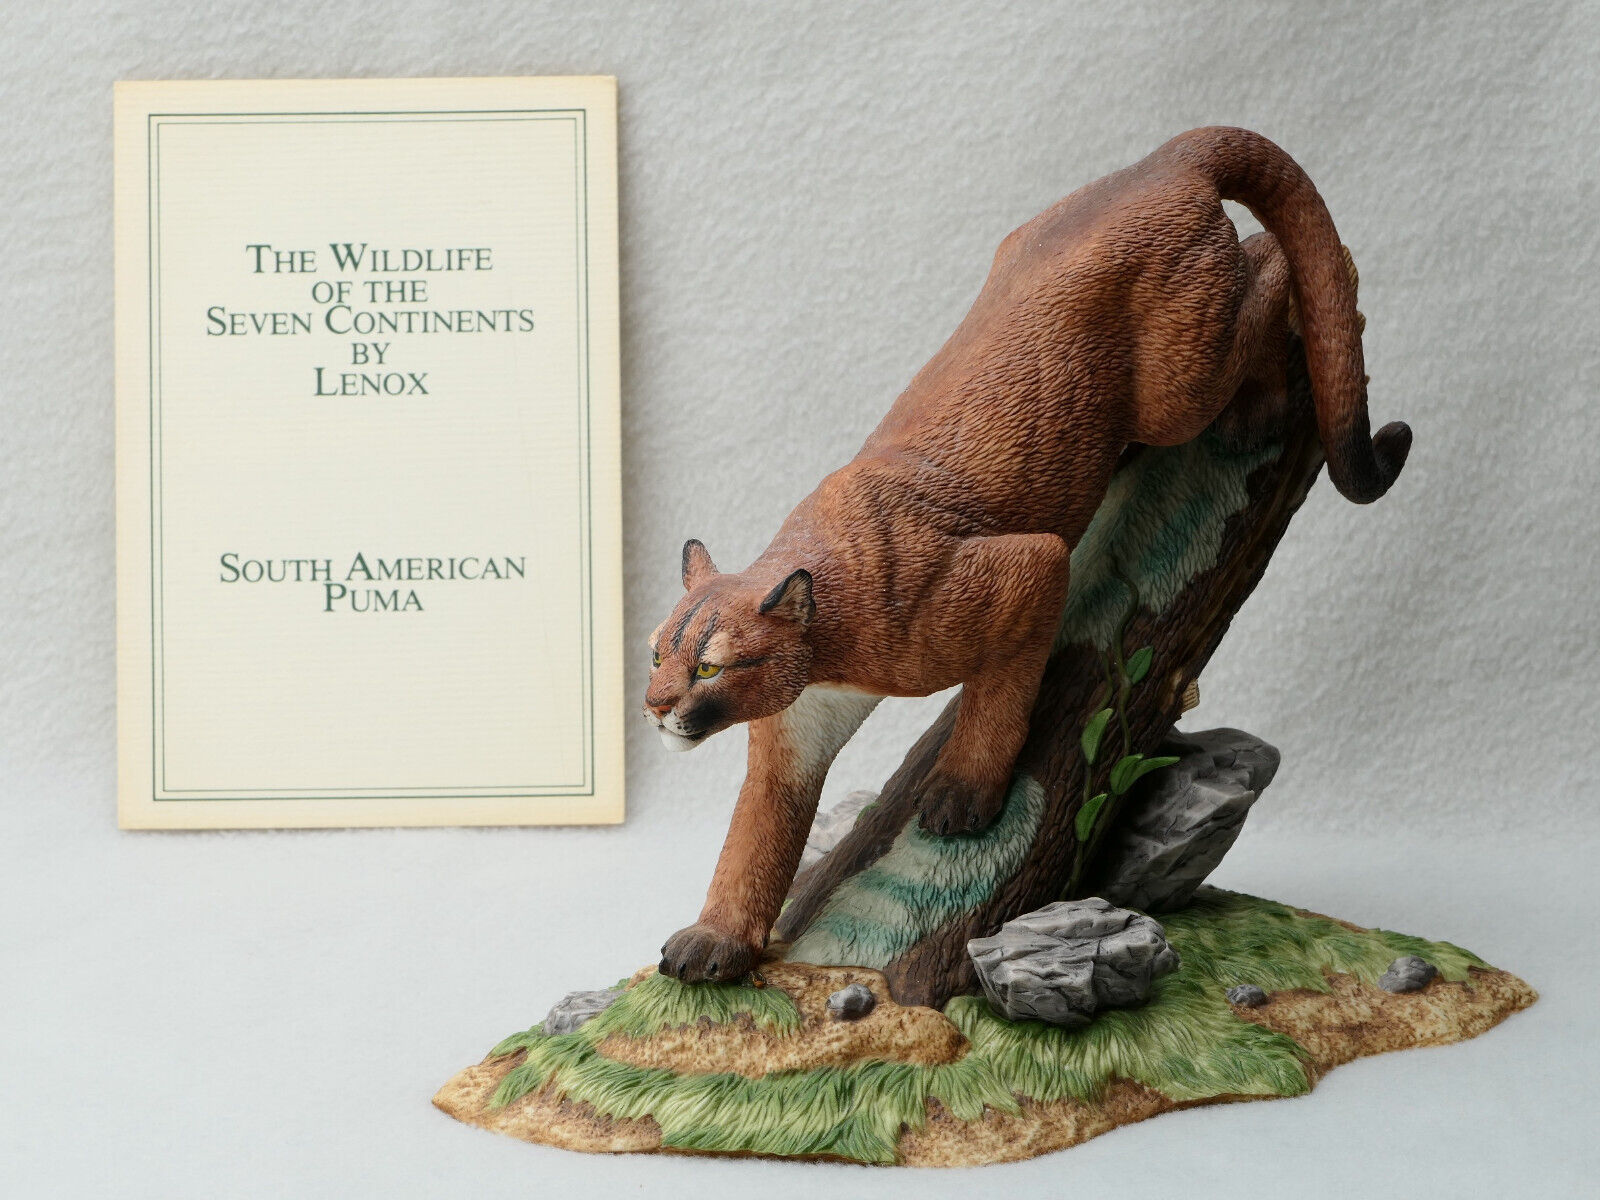 Lenox Wildlife Of The Seven Continents South America Puma Porcelain Figurine